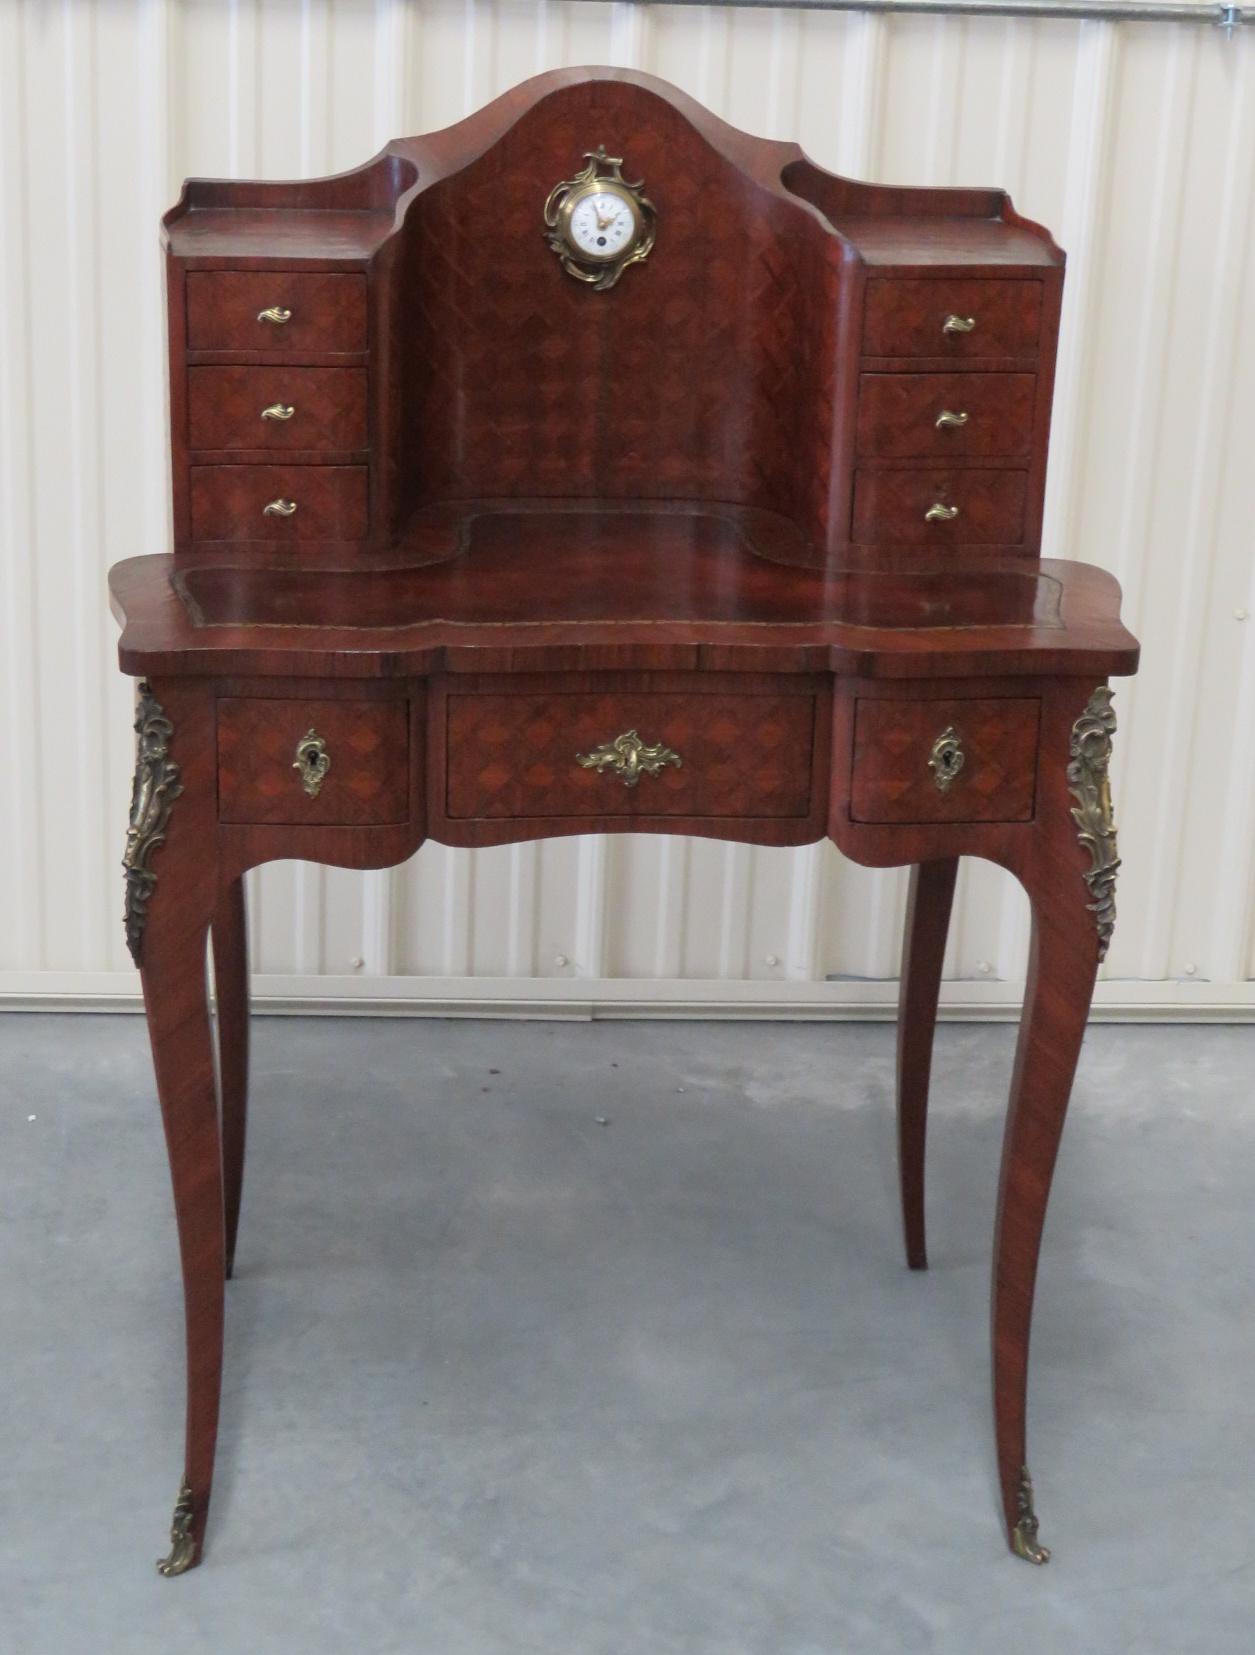 Inlay Rare Size Rosewood French Louis XVI Leather Top Rosewood Desk With Clock 